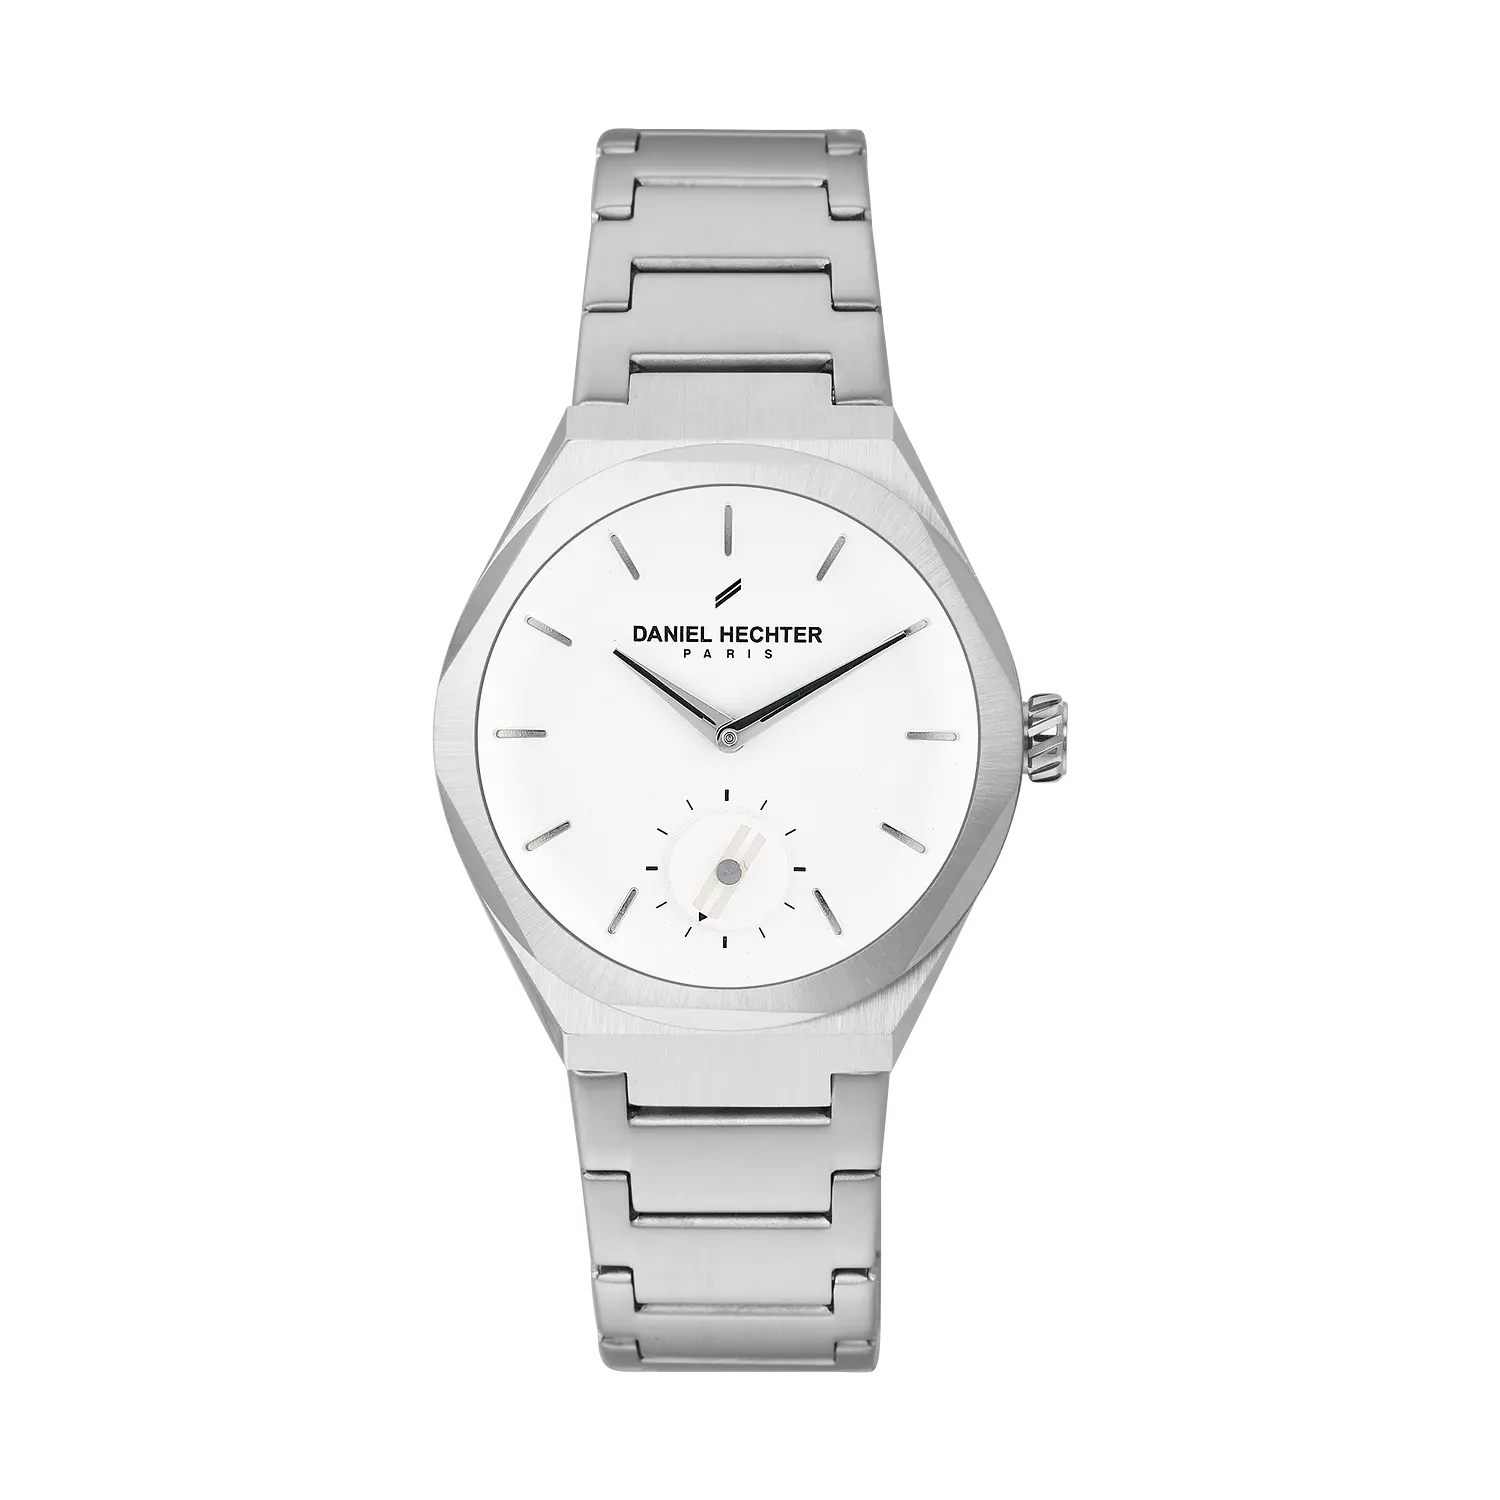 Daniel Hechter Women Watch - Fusion Lady - DHL00209 hover image